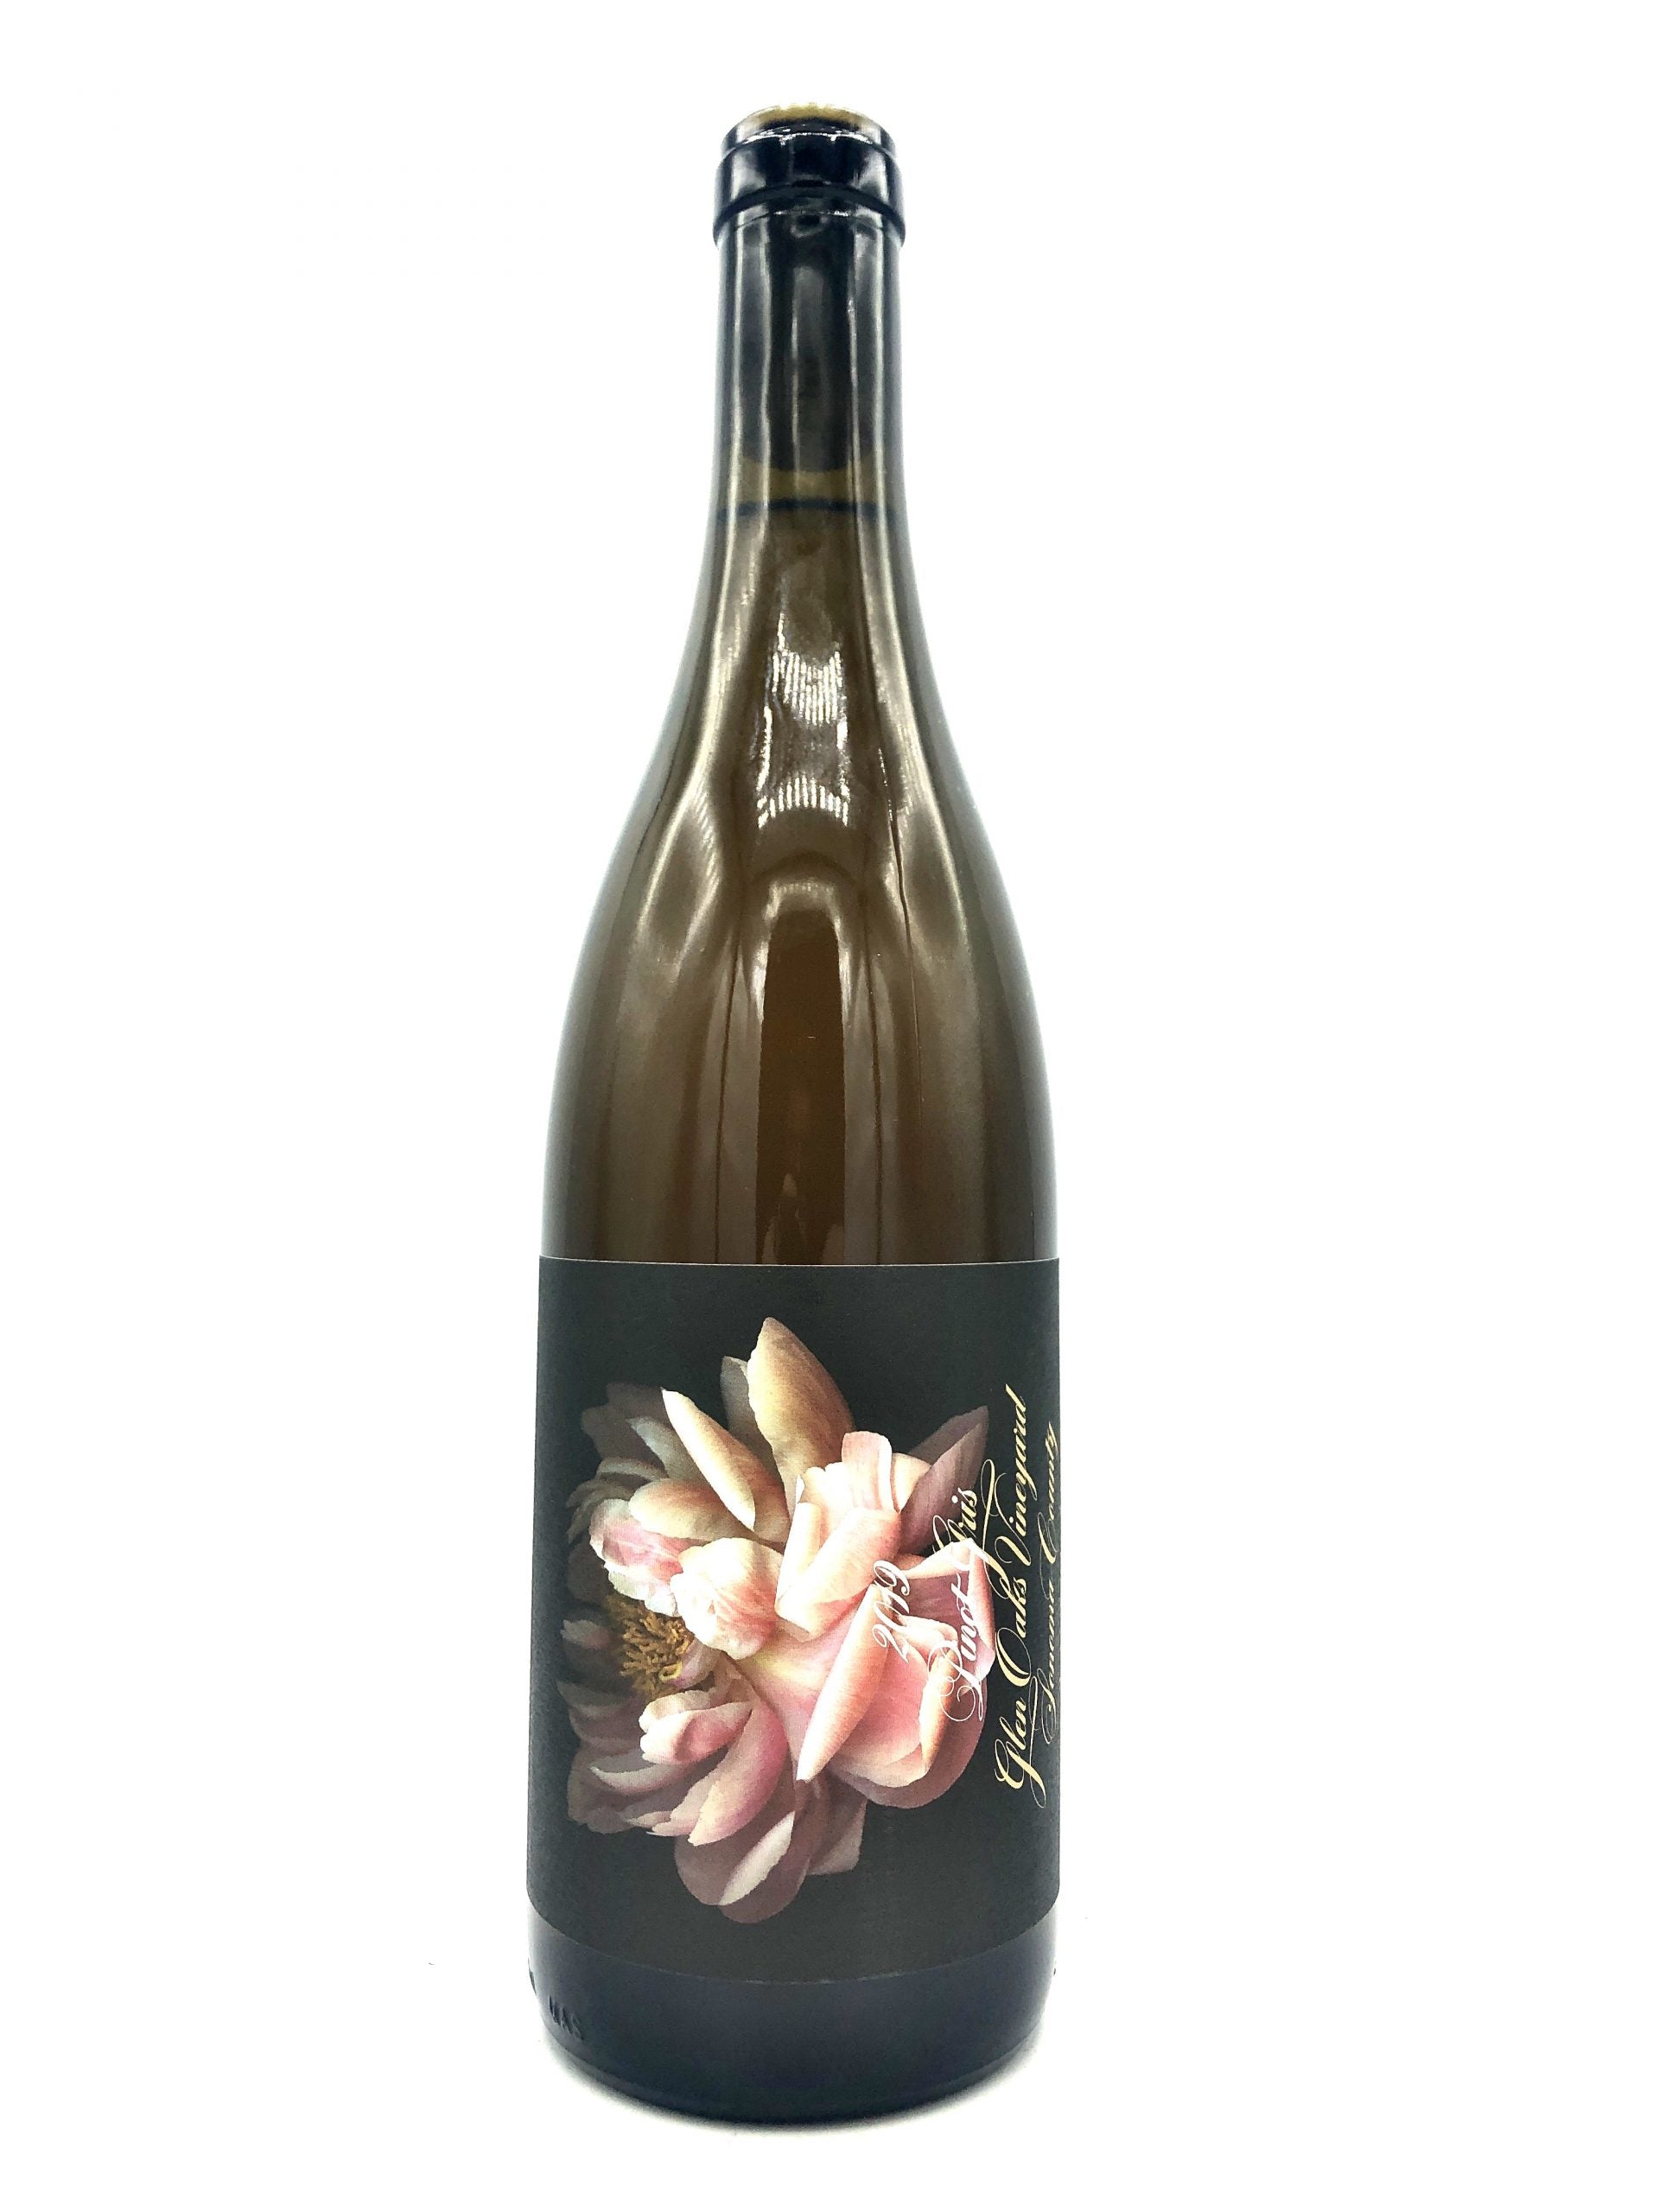 Jolie-Laide, Pinot Gris, Sonoma County CA, 2019